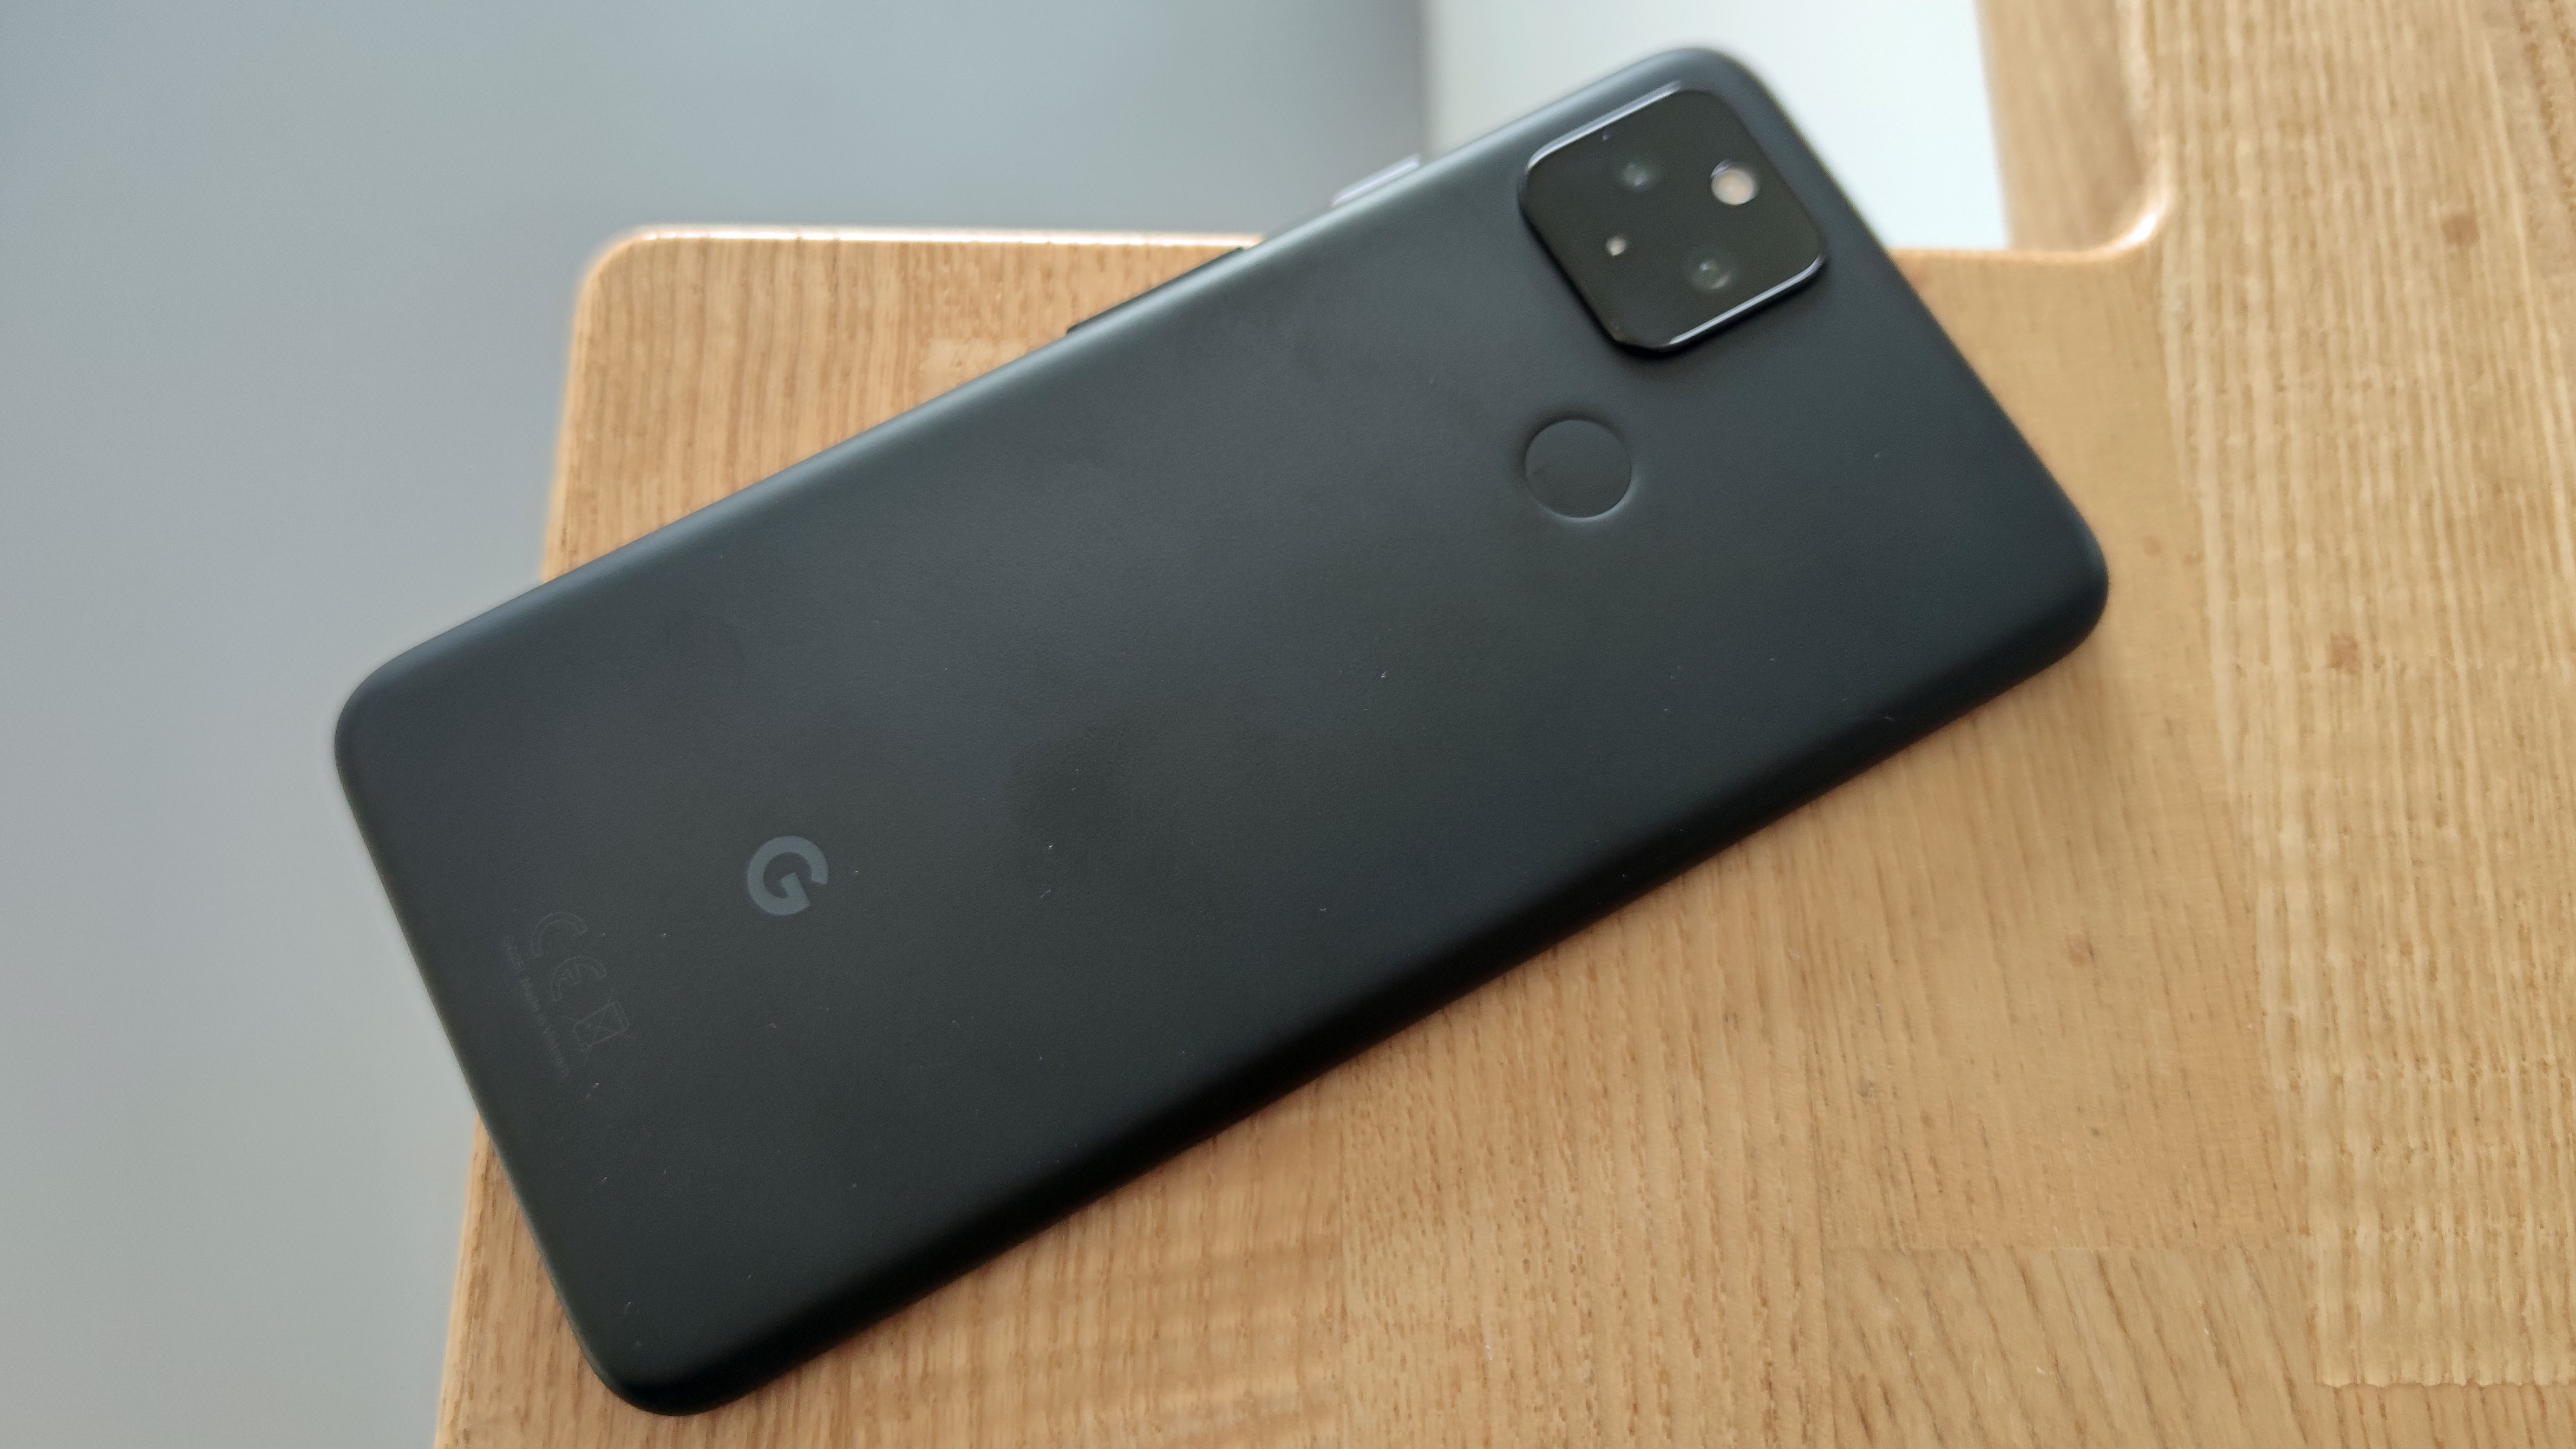 Google Pixel 5 vs Google Pixel 4a 5G vs Google Pixel 4a: which is for